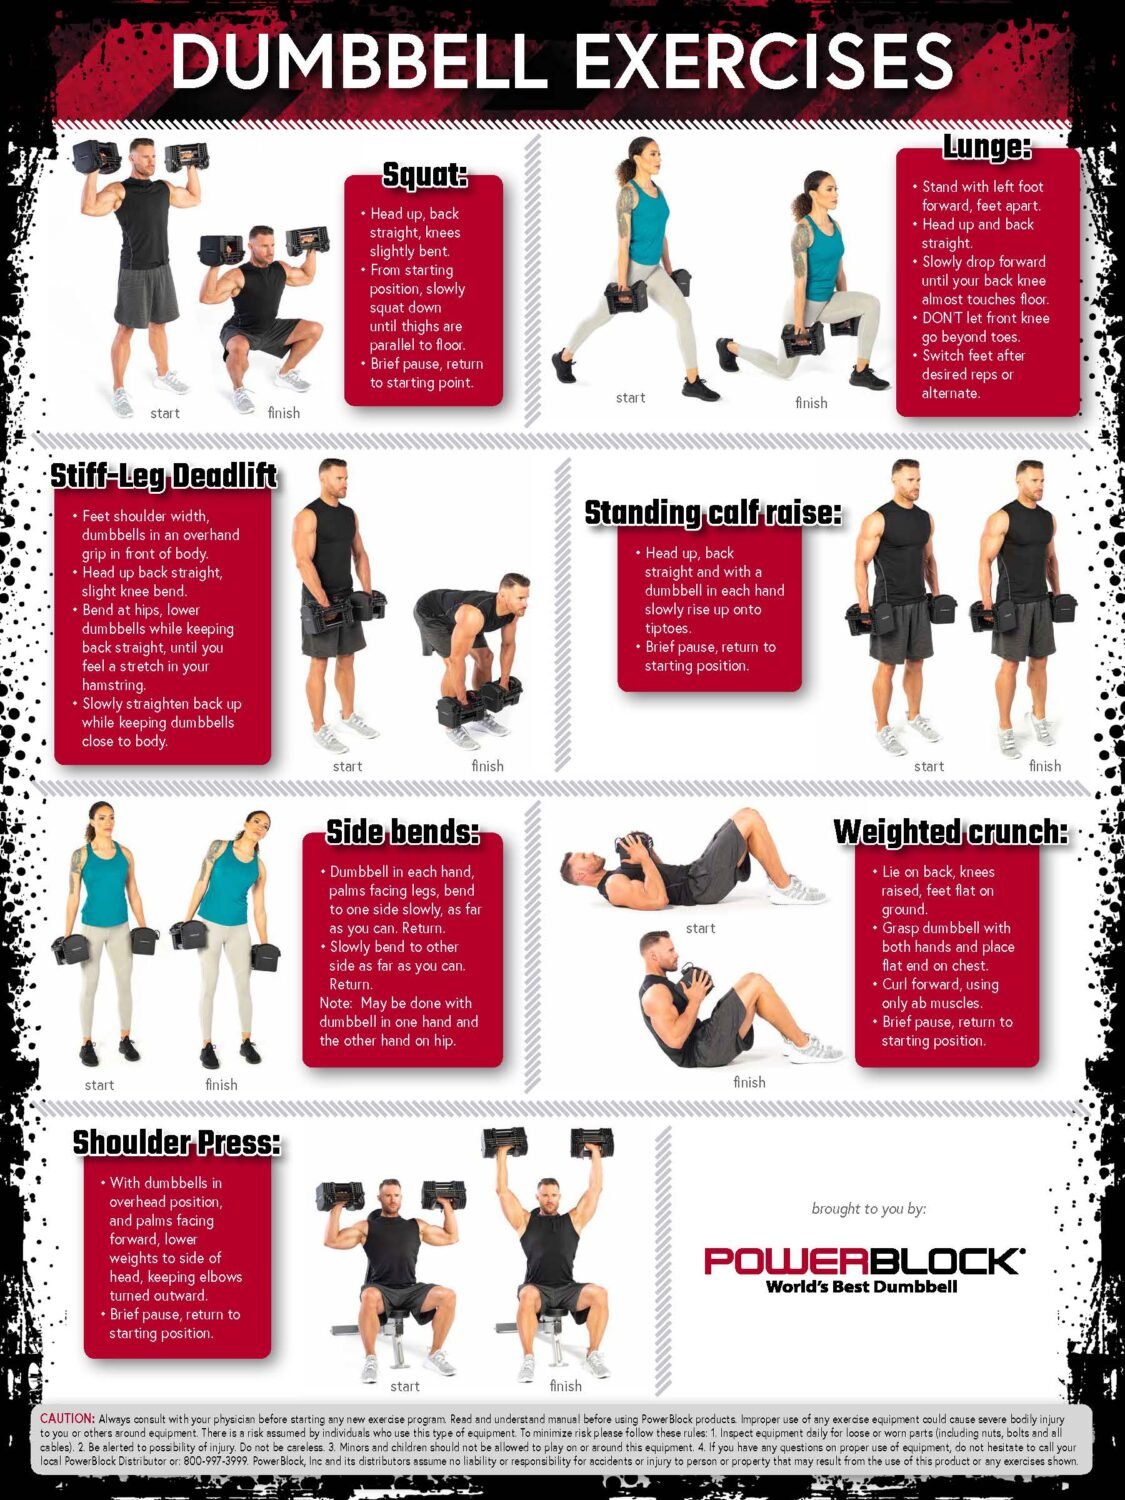 DUMBBELL WORKOUT Dumbells Free Weights Pro Fitness Wall Charts 2 POSTER SET 